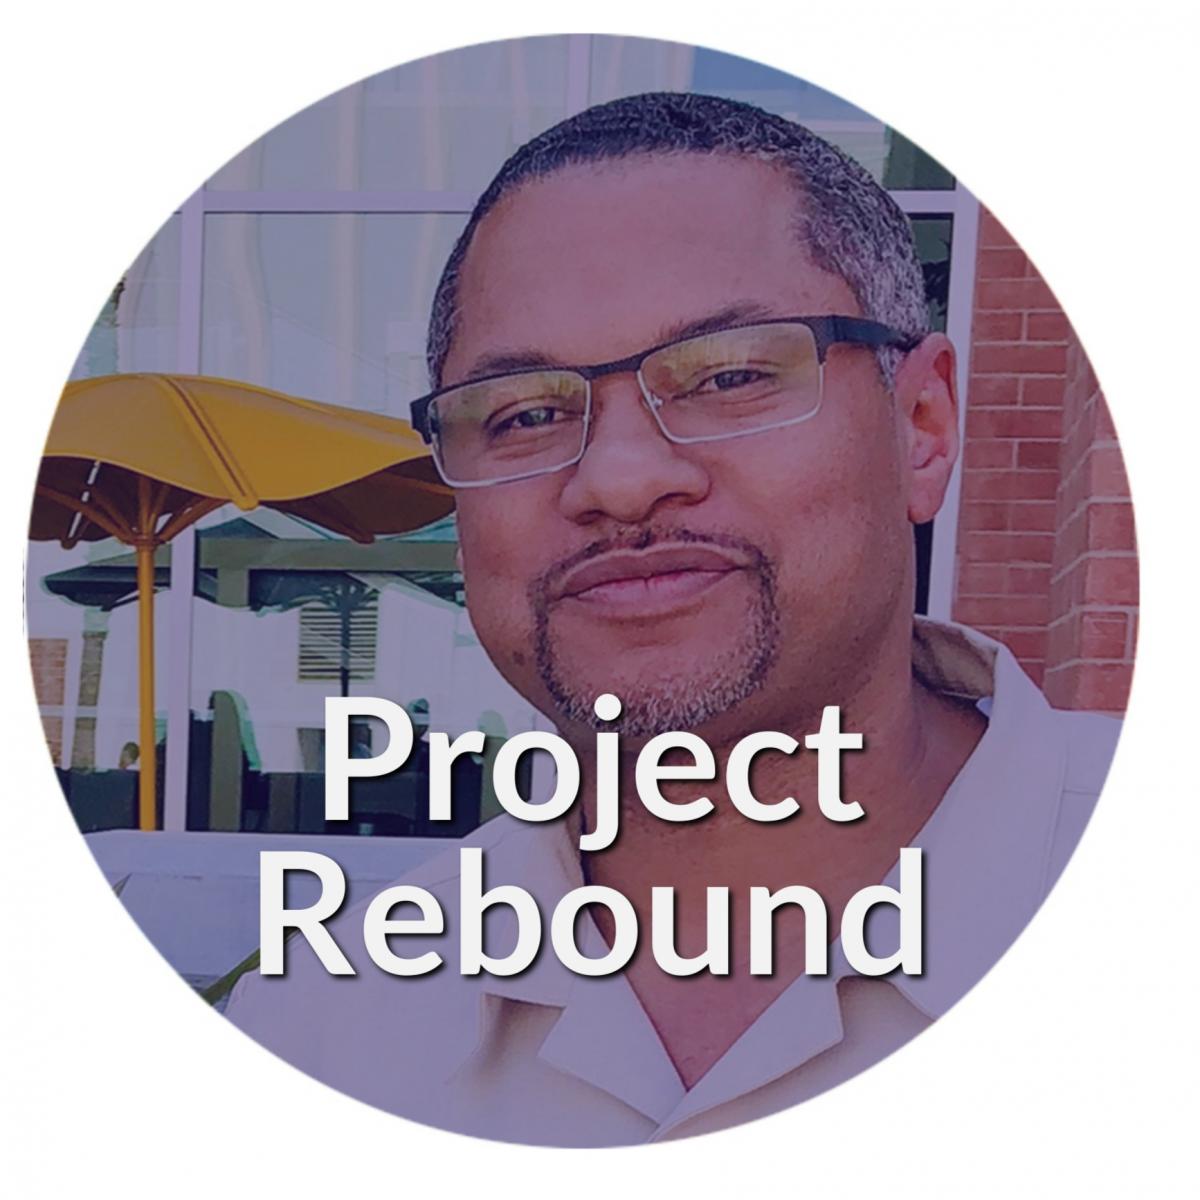 Project Rebound with the director of the program